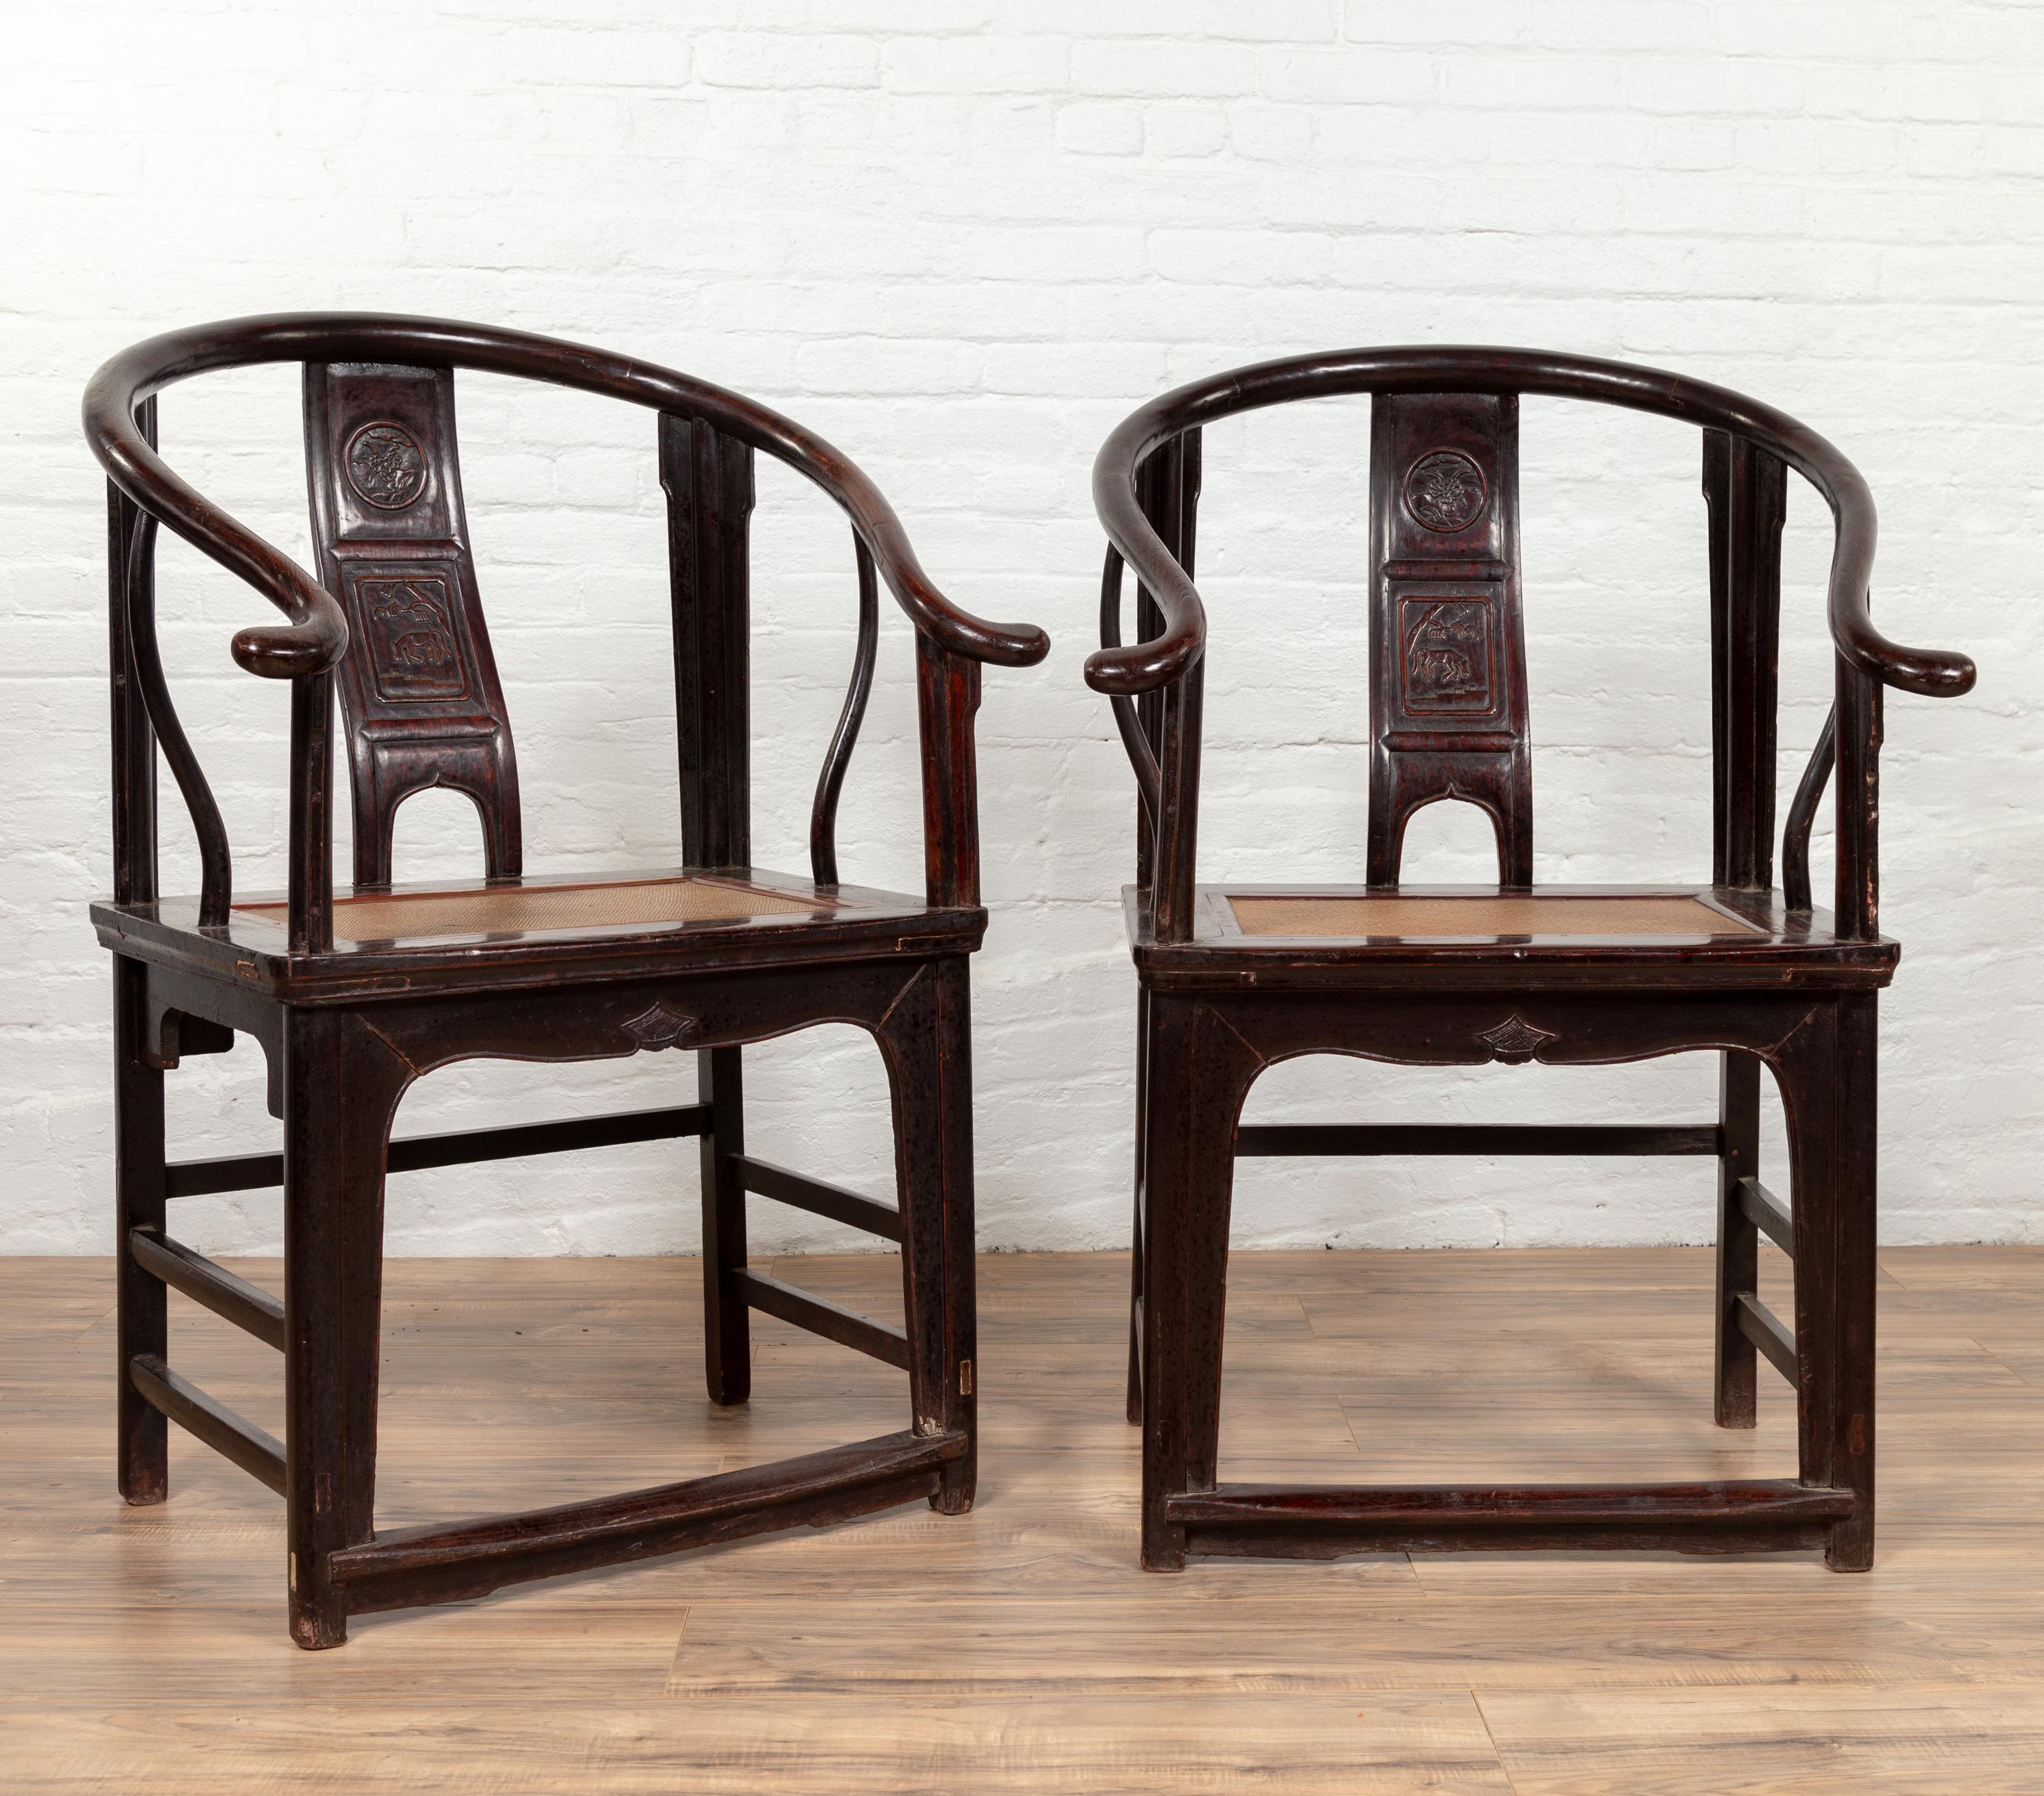 A pair of Chinese antique Ming dynasty style black wood horseshoe armchairs from the early 20th century, with carved backs and rattan seats. Each of this pair of black wooden armchairs features an exquisite horseshoe back, adorned with a sinuous